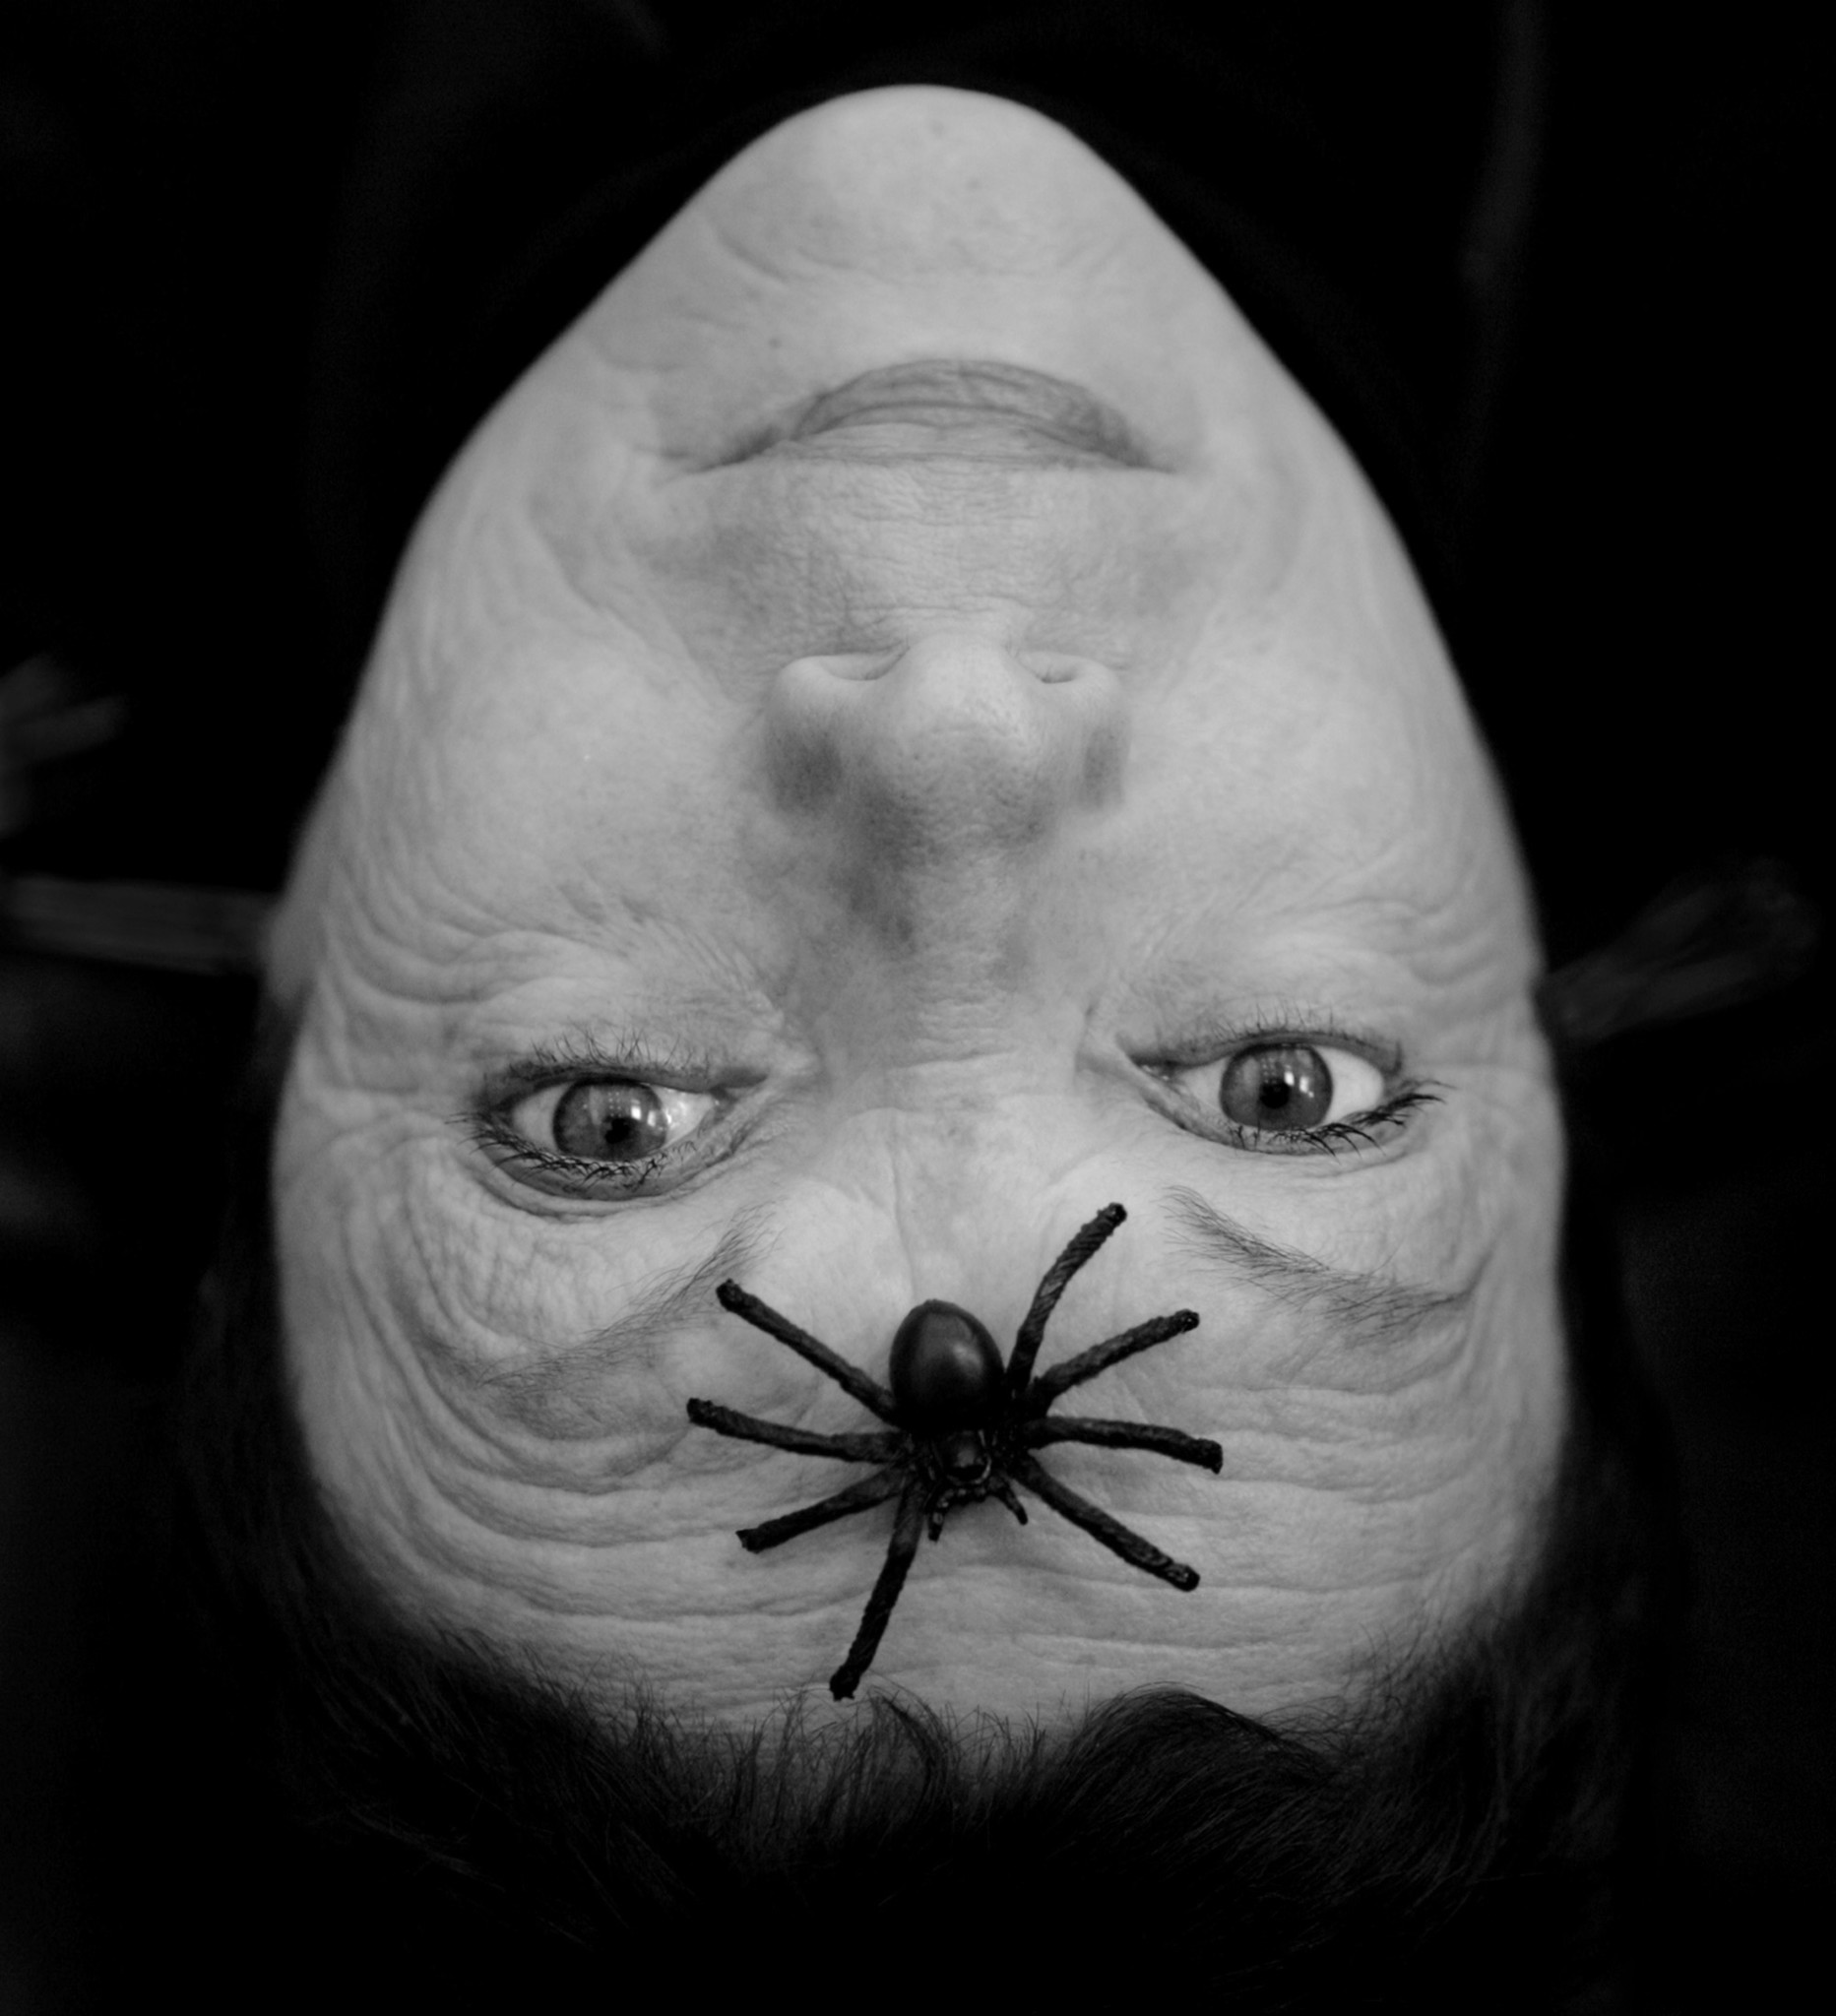 Mexican artist Graciela Iturbide playing around with a plastic spider in Los Angeles in 2007.